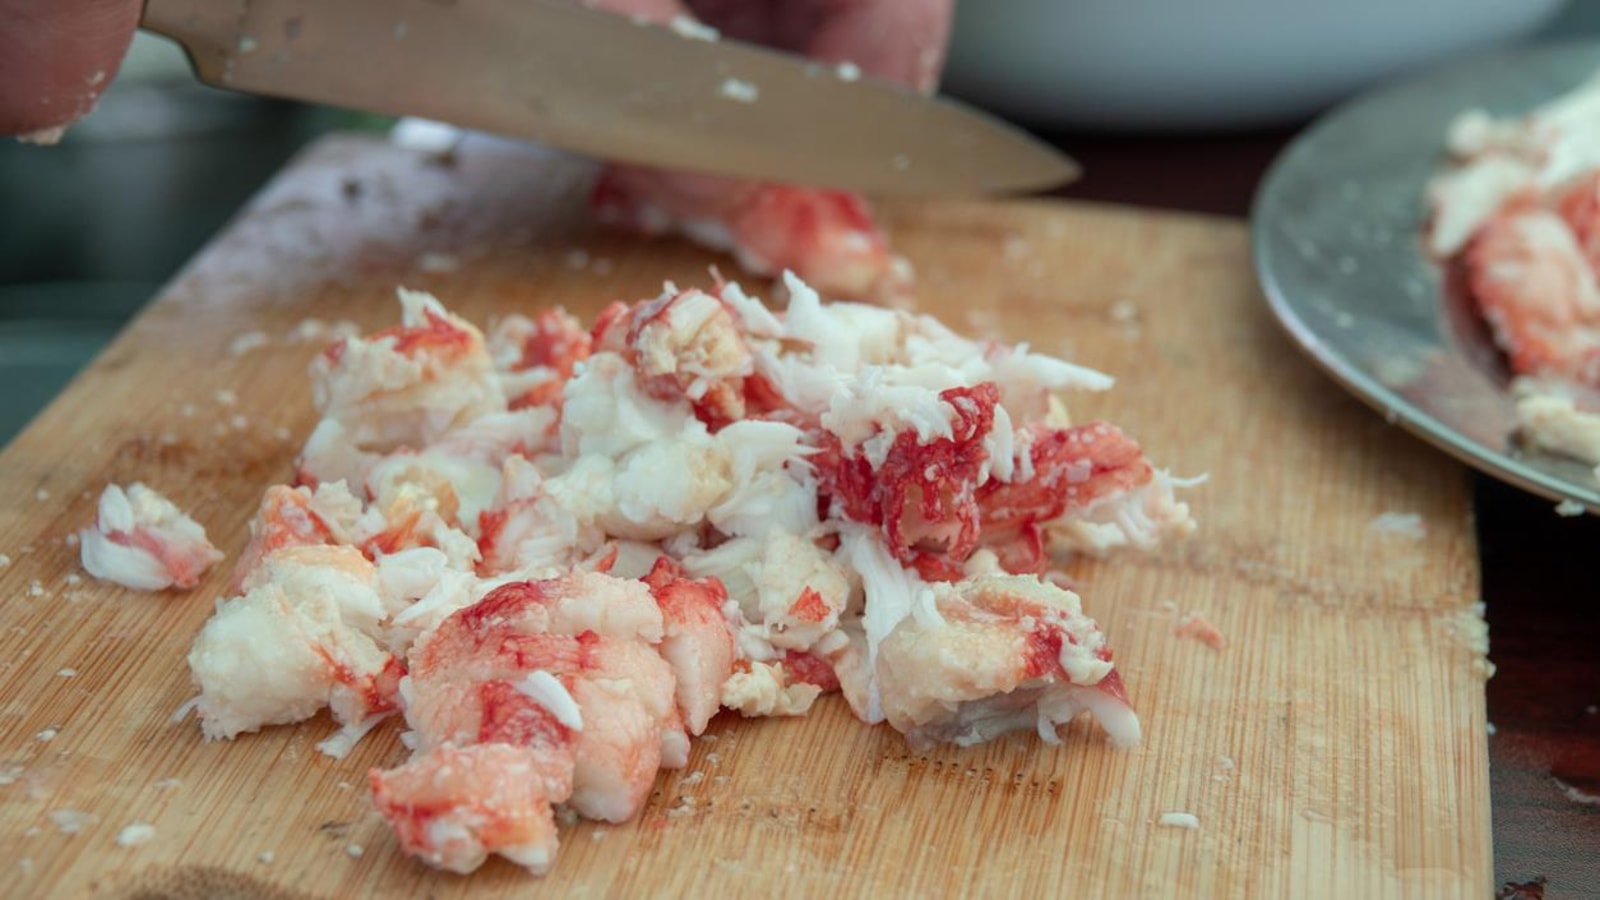 The cook cuts lobster meat.